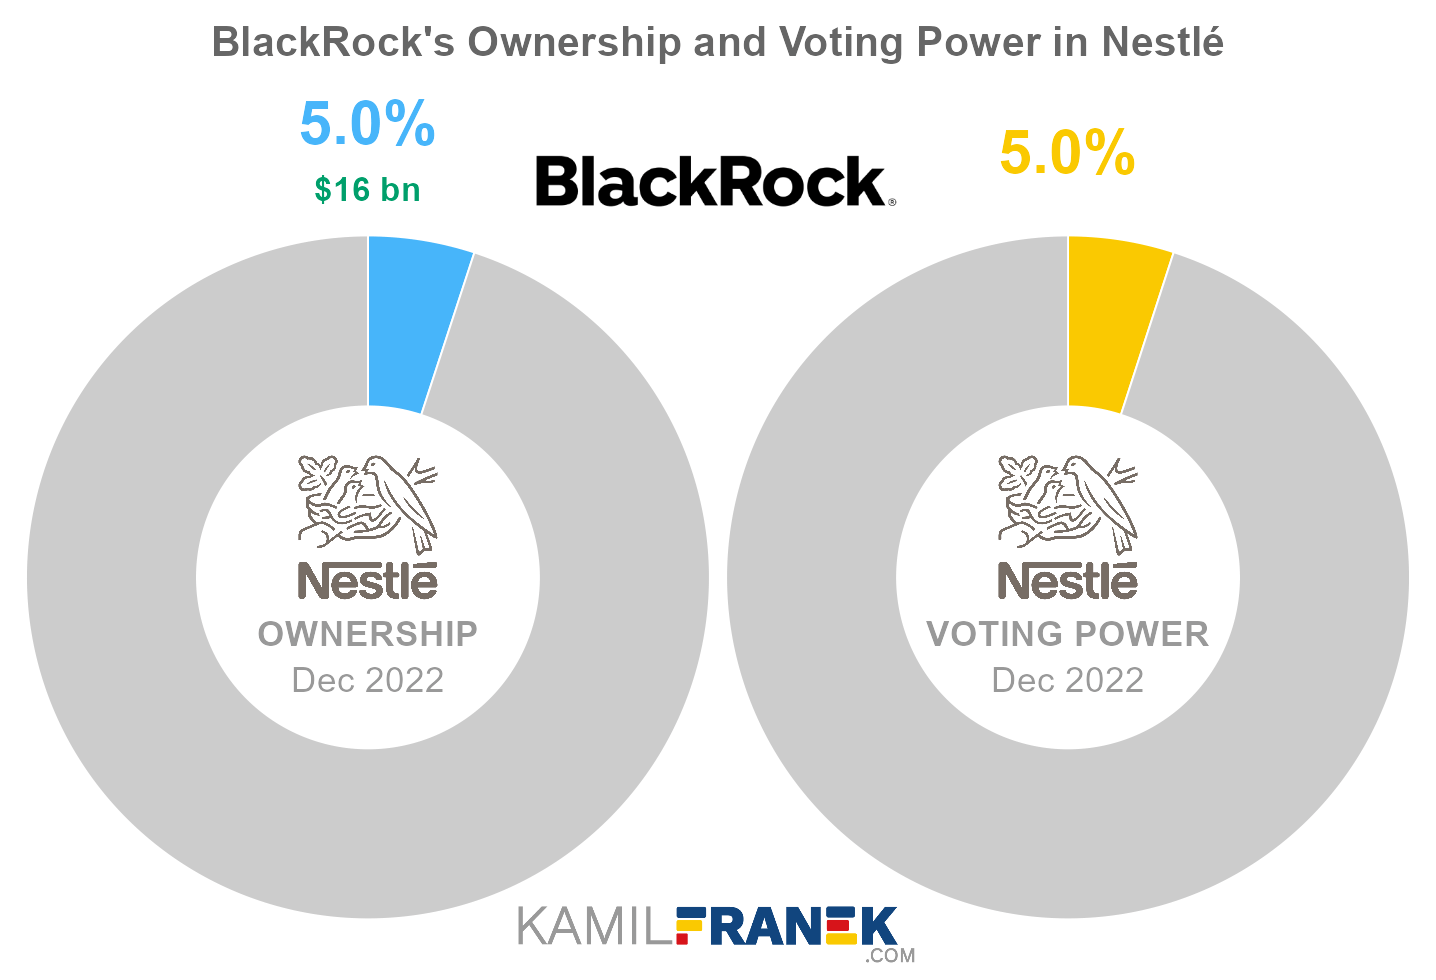 BlackRock's share ownership and voting power in Nestlé (chart)